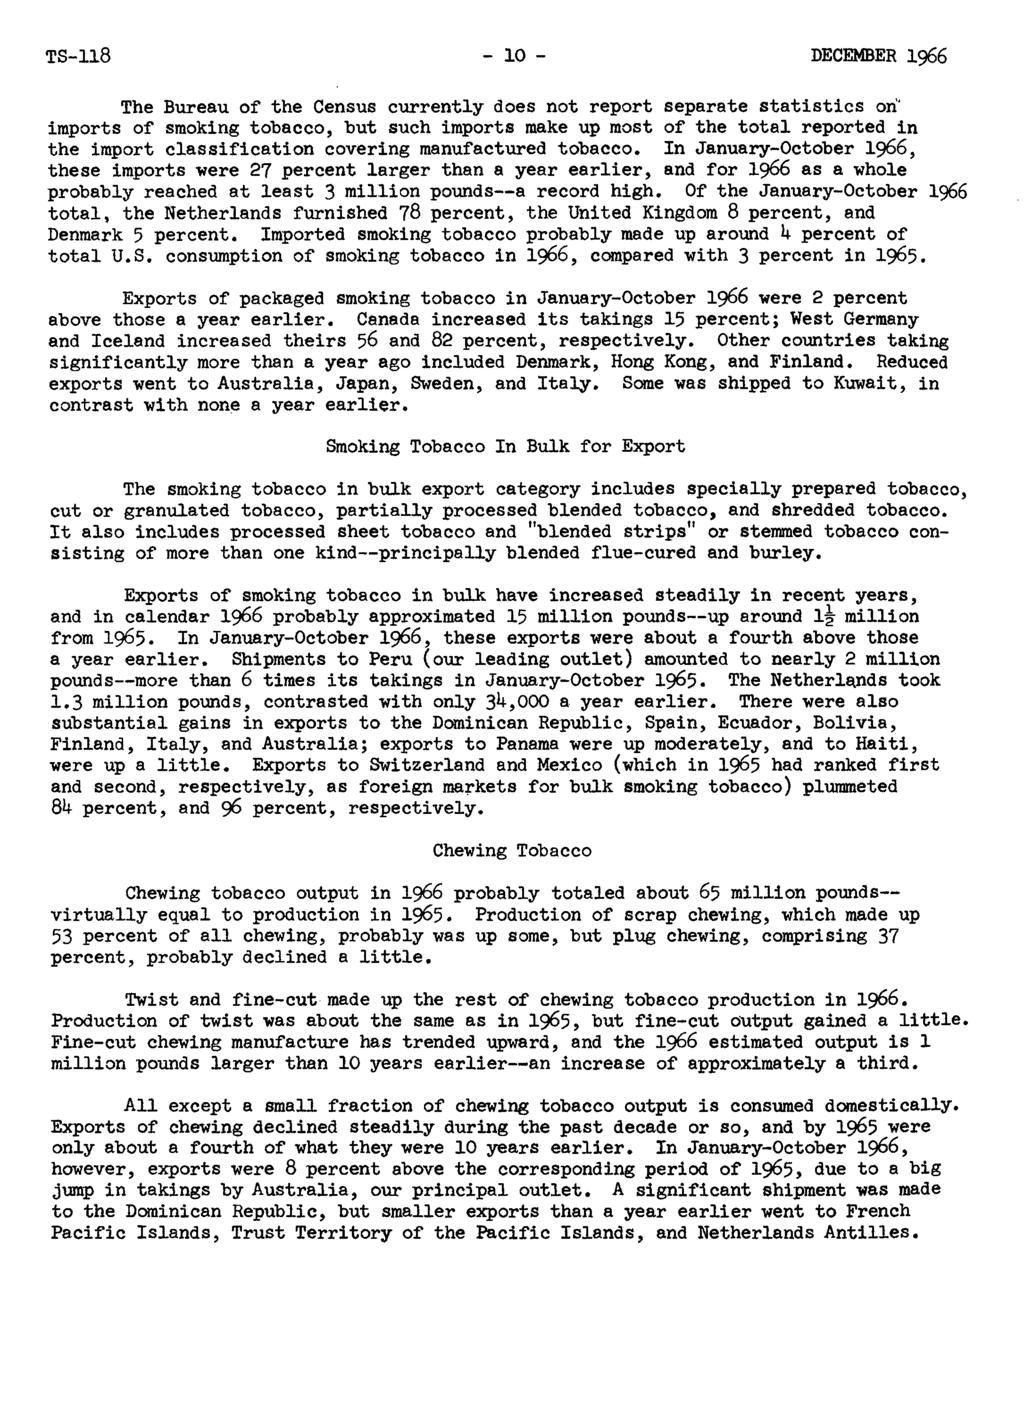 TS-ll8-1- DECEMBER 1966 The Bureau of the Census currently does not report separate statistics on imports of smoking tobacco, but such imports make up most of the total reported in the import